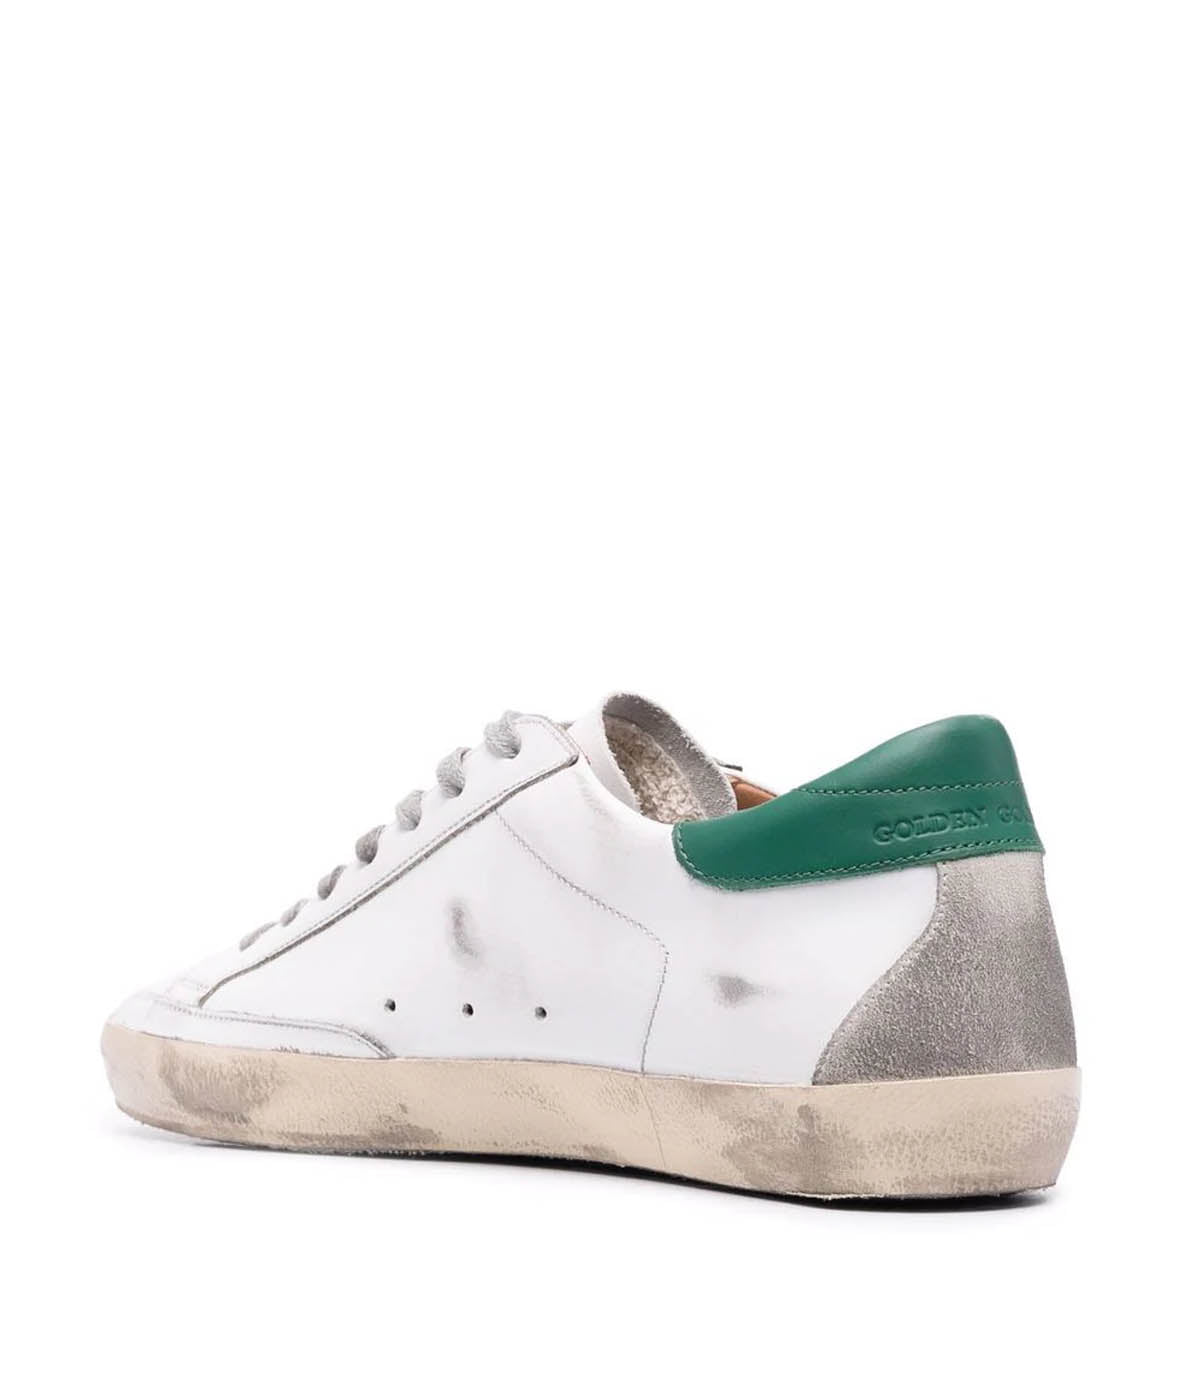 Super Star Leather Upper in White, Ice & Green